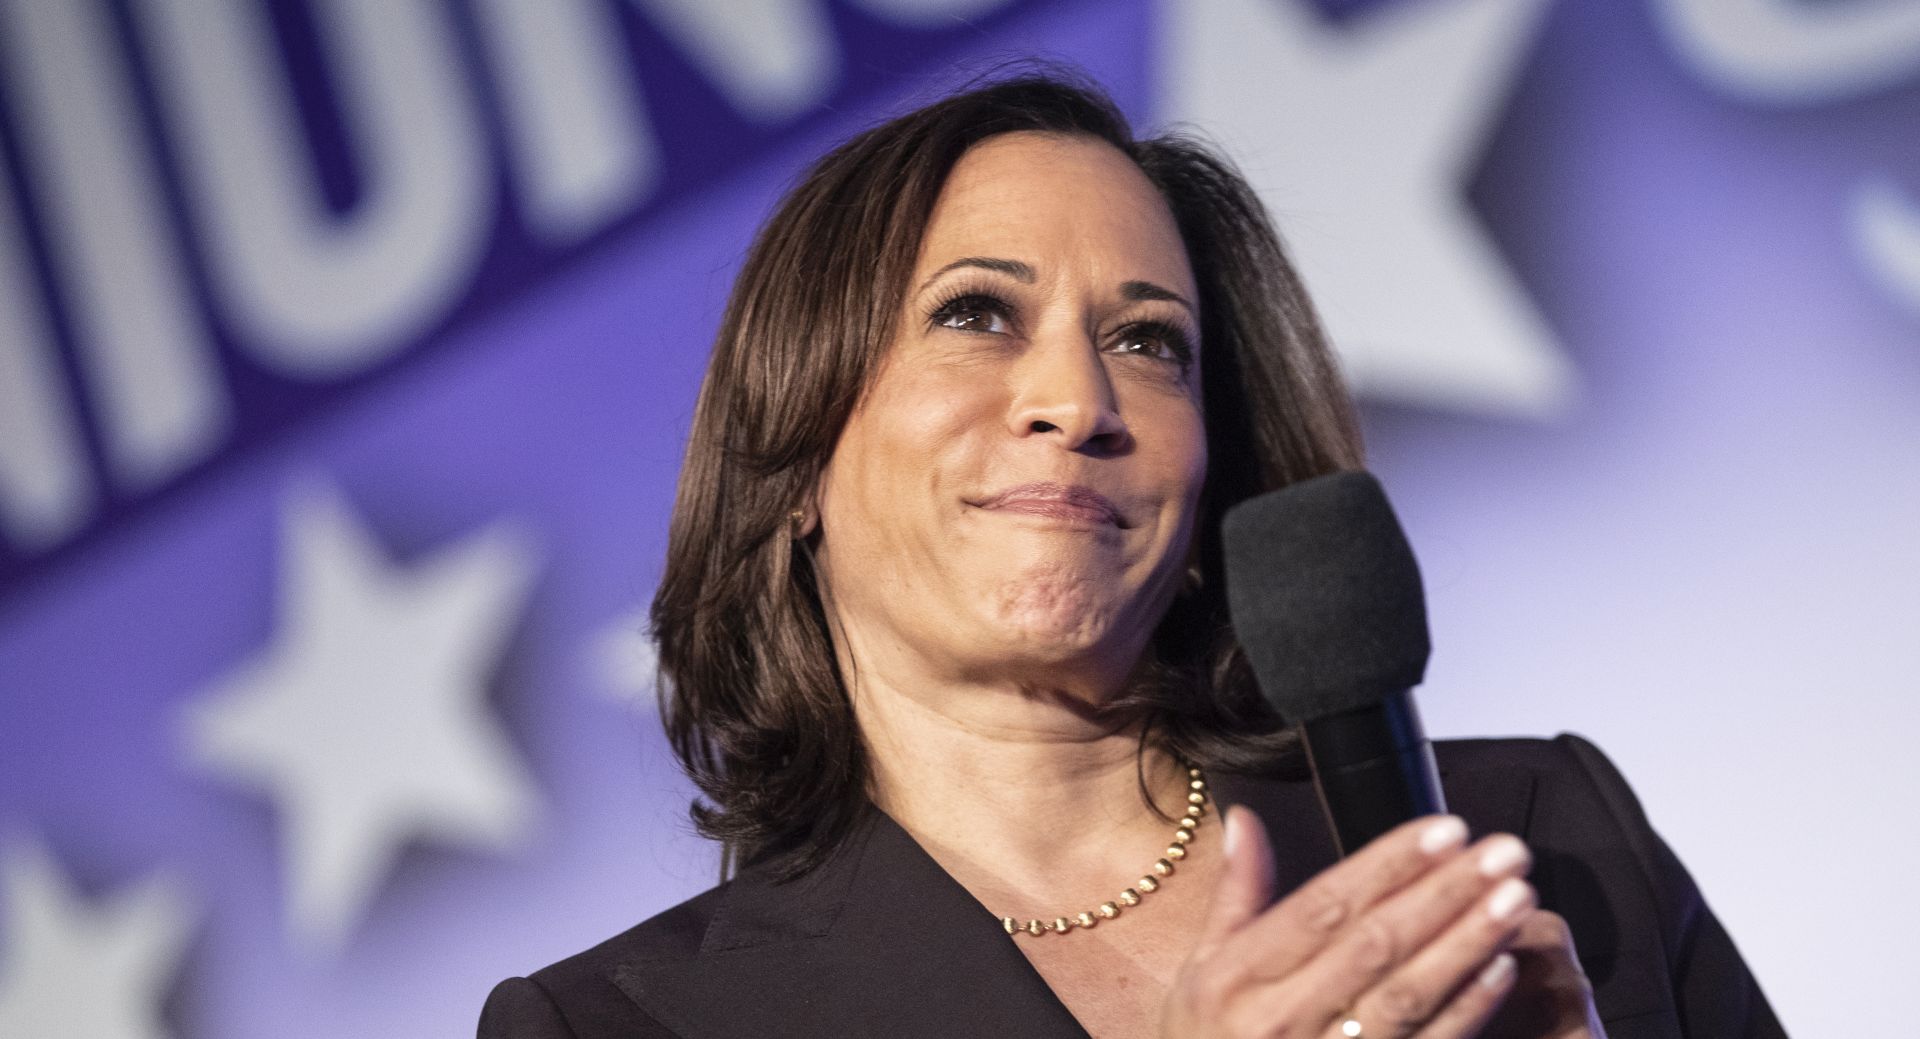 epa08598085 (FILE) - Democratic candidate for Presidency and Senator, Kamala Harris delivers a speech during SEIU's Unions for All summit in Los Angeles, California, USA, 04 October 2019 (reissued 11 August 2020). Democratic presidential candidate Joe Biden has chosen Kamala Harris as his pick for Vice President, according to a statement on Biden's Twitter account, on 11 August 2020.  EPA/ETIENNE LAURENT *** Local Caption *** 55523246